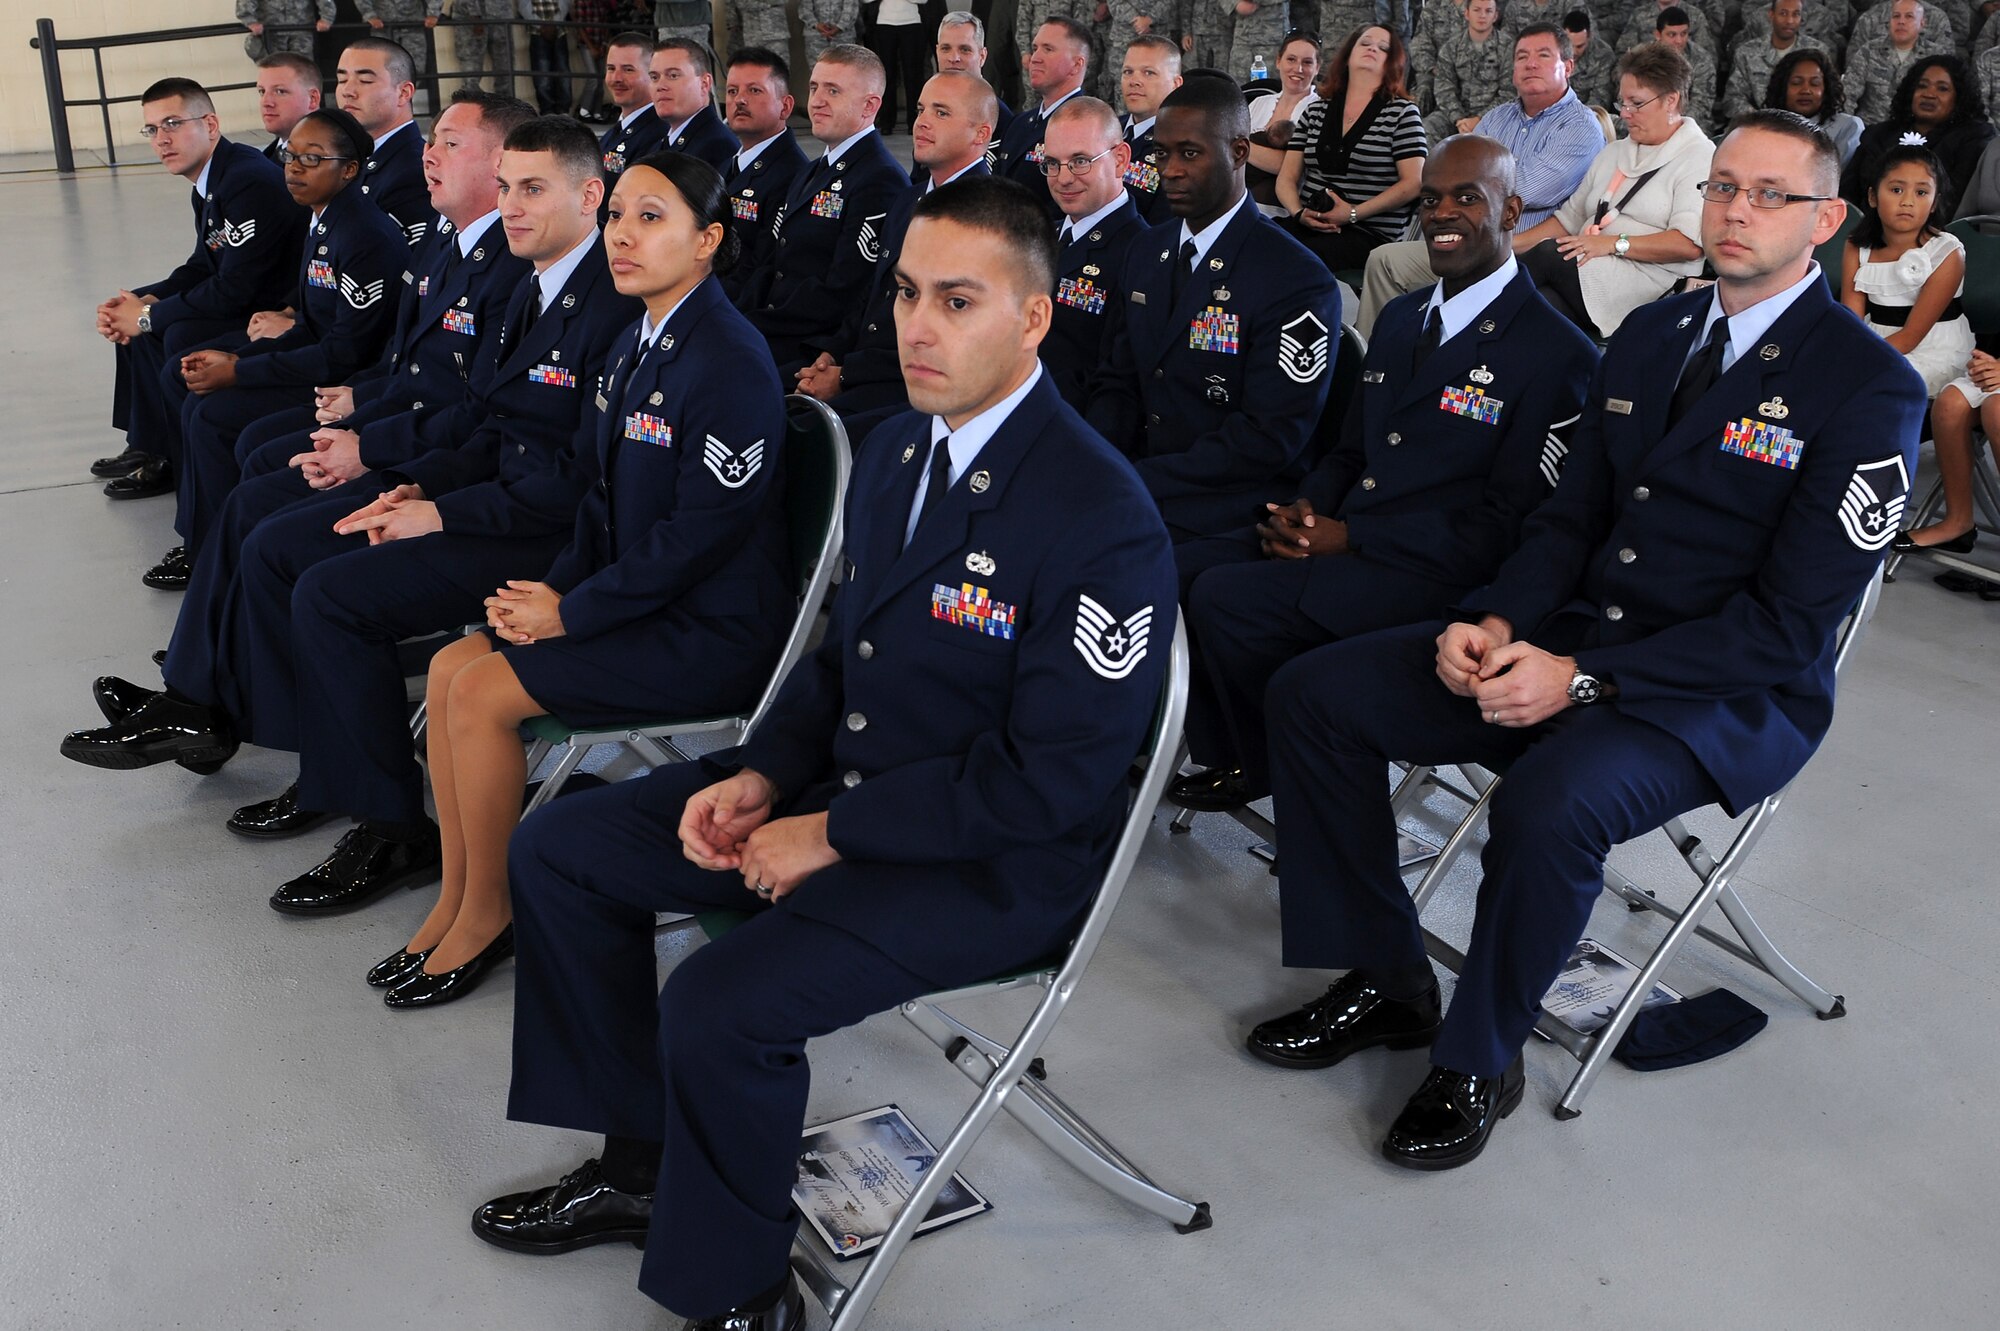 Moody Air Force Base’s newest promotees sit at the conclusion of a promotion ceremony Dec. 30, 2011. Family, friends and co-workers attended to congratulate the Airmen. (U.S. Air Force photo by Staff Sgt. Ciara Wymbs/Released)